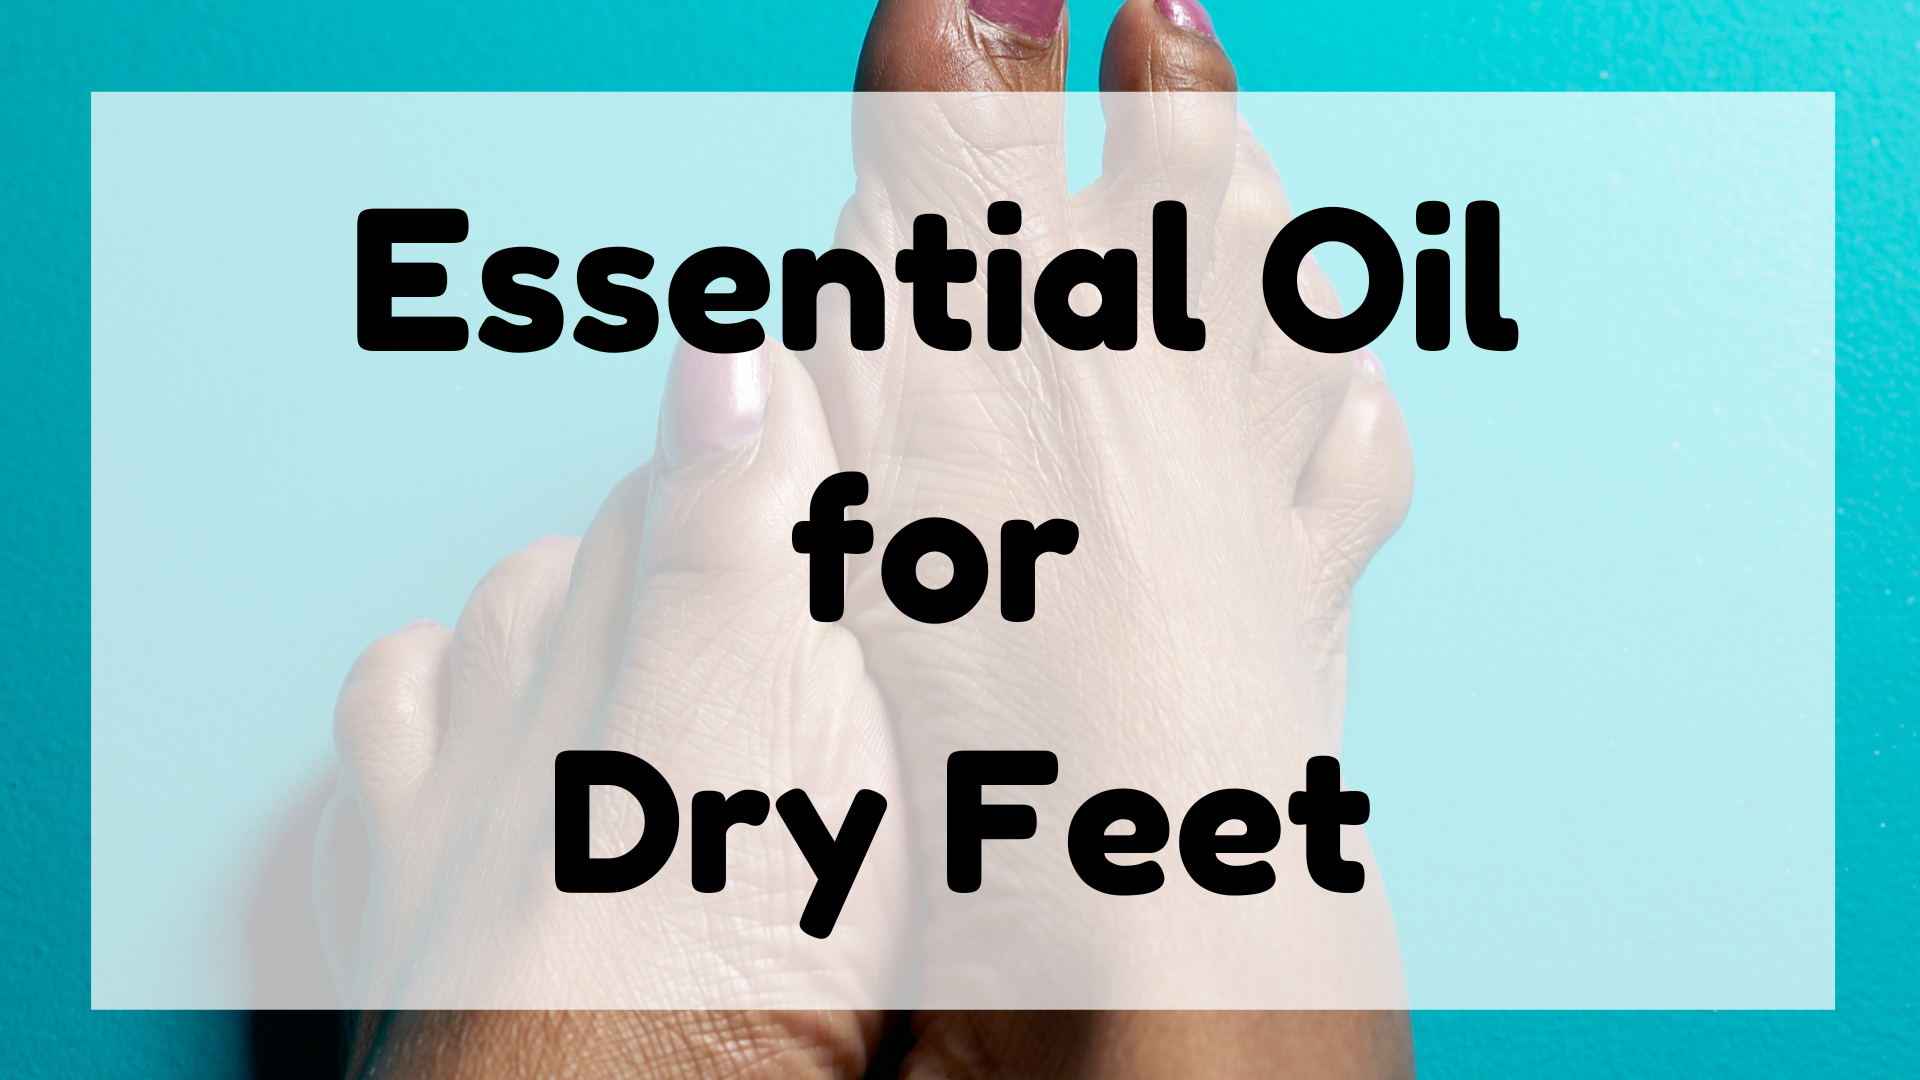 Essential Oil for Dry Feet featured image